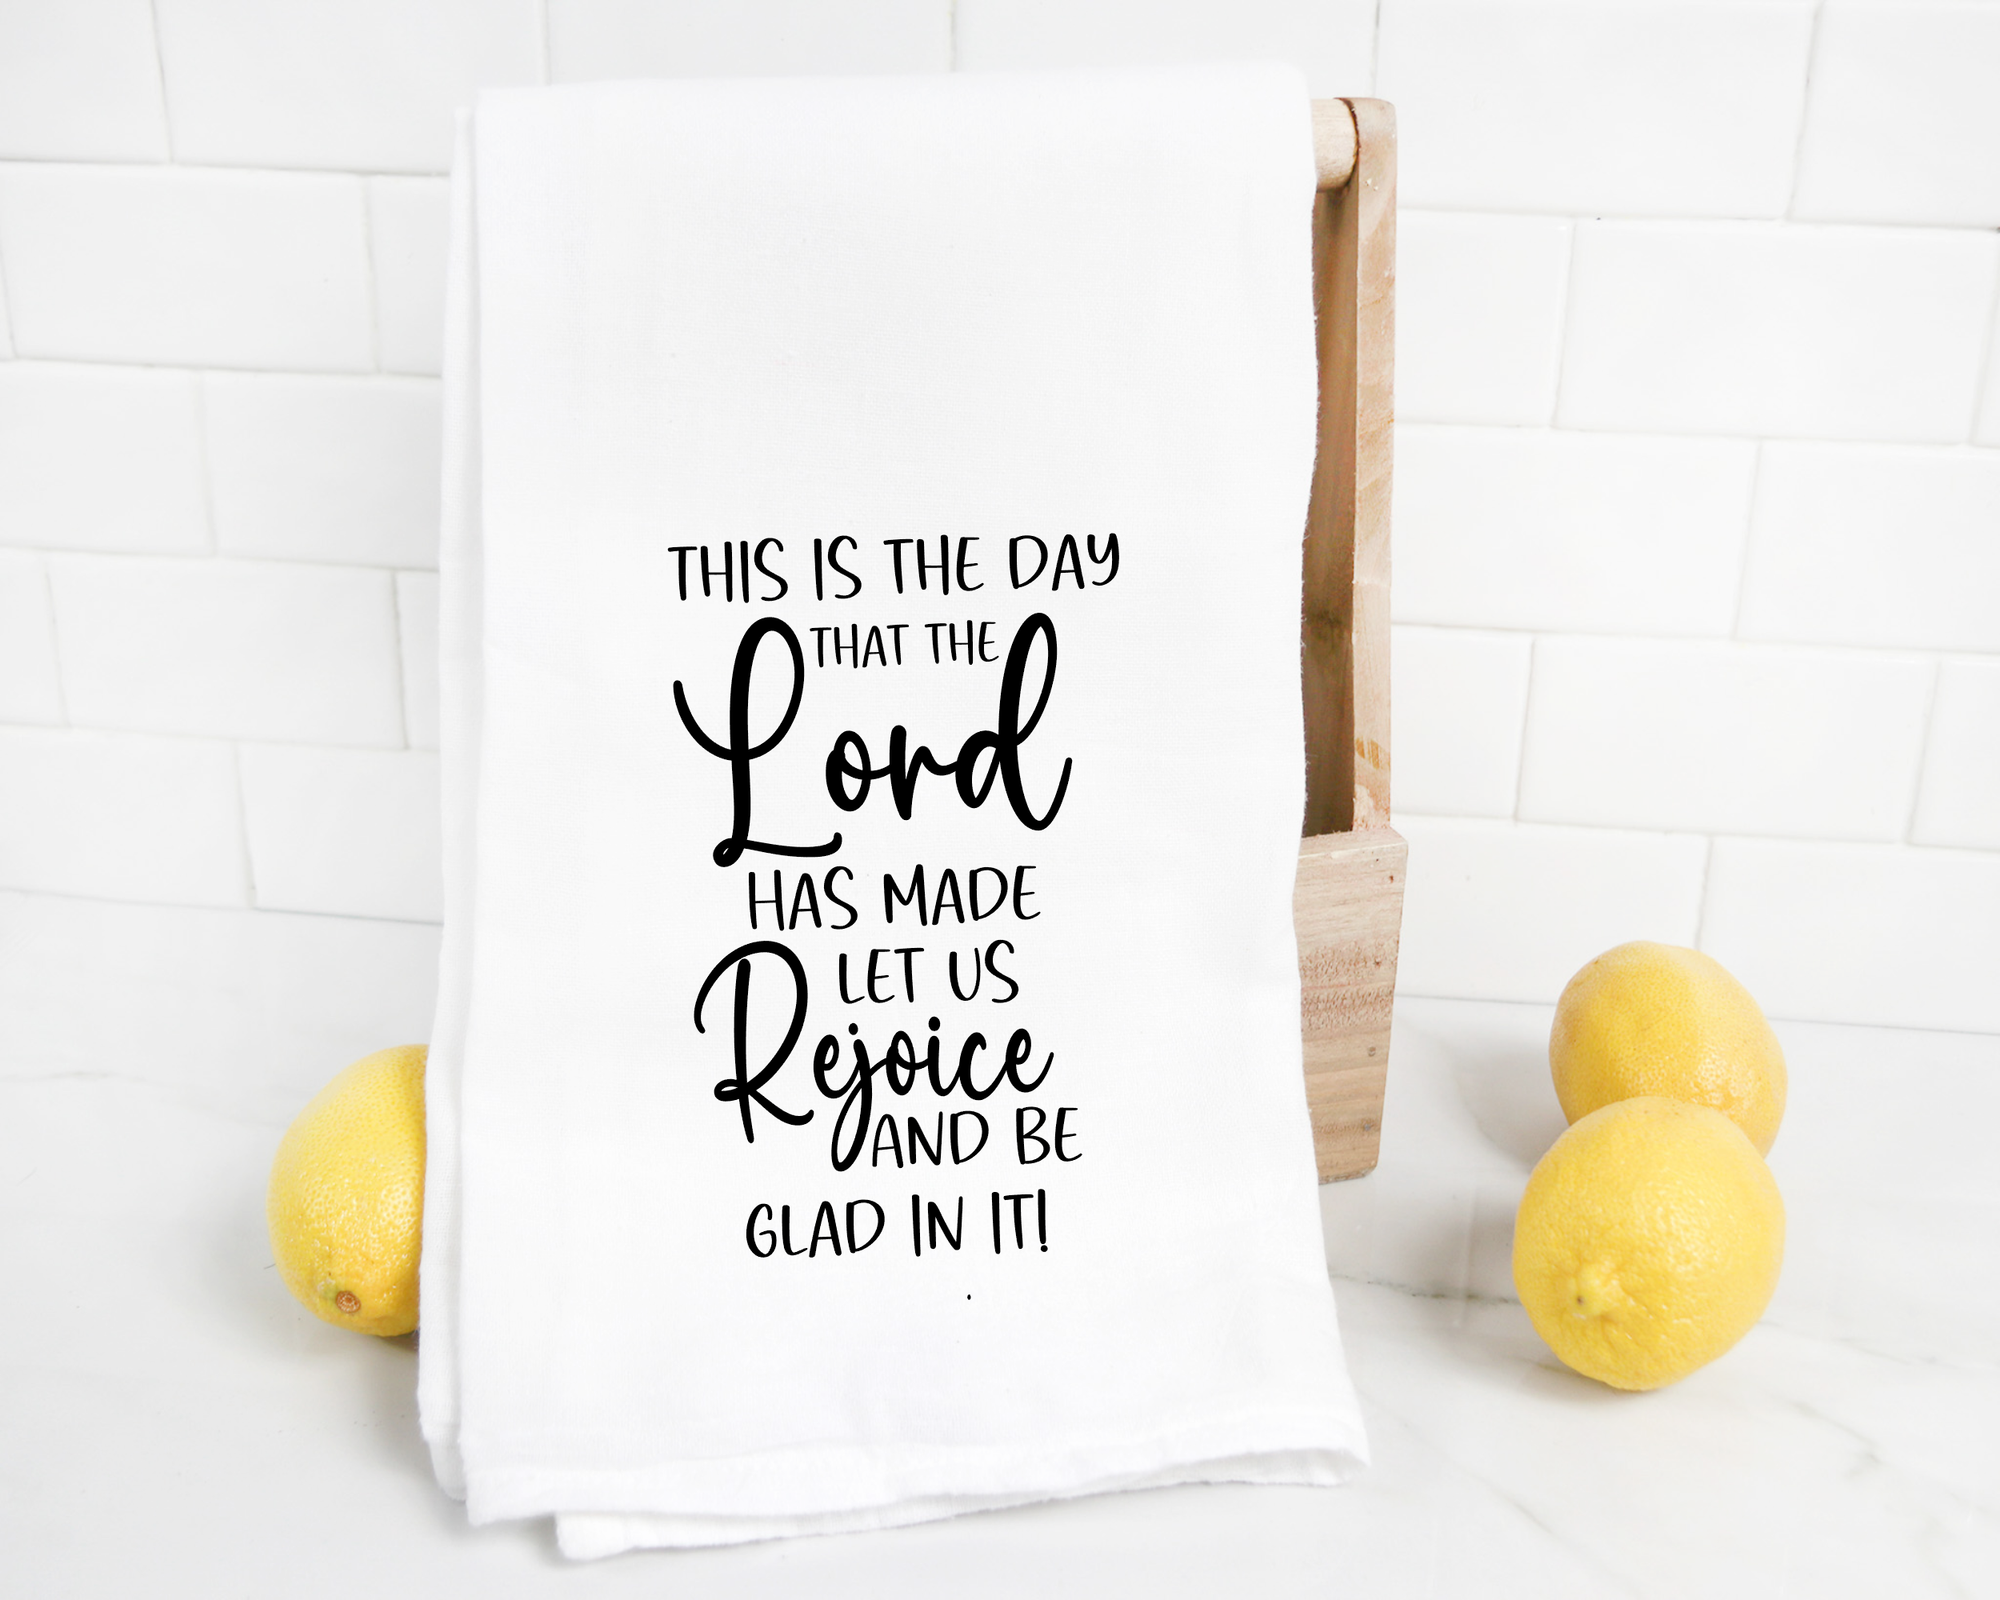 This Psalm 118 Tea Towel is a joyful reminder of Psalm 118.